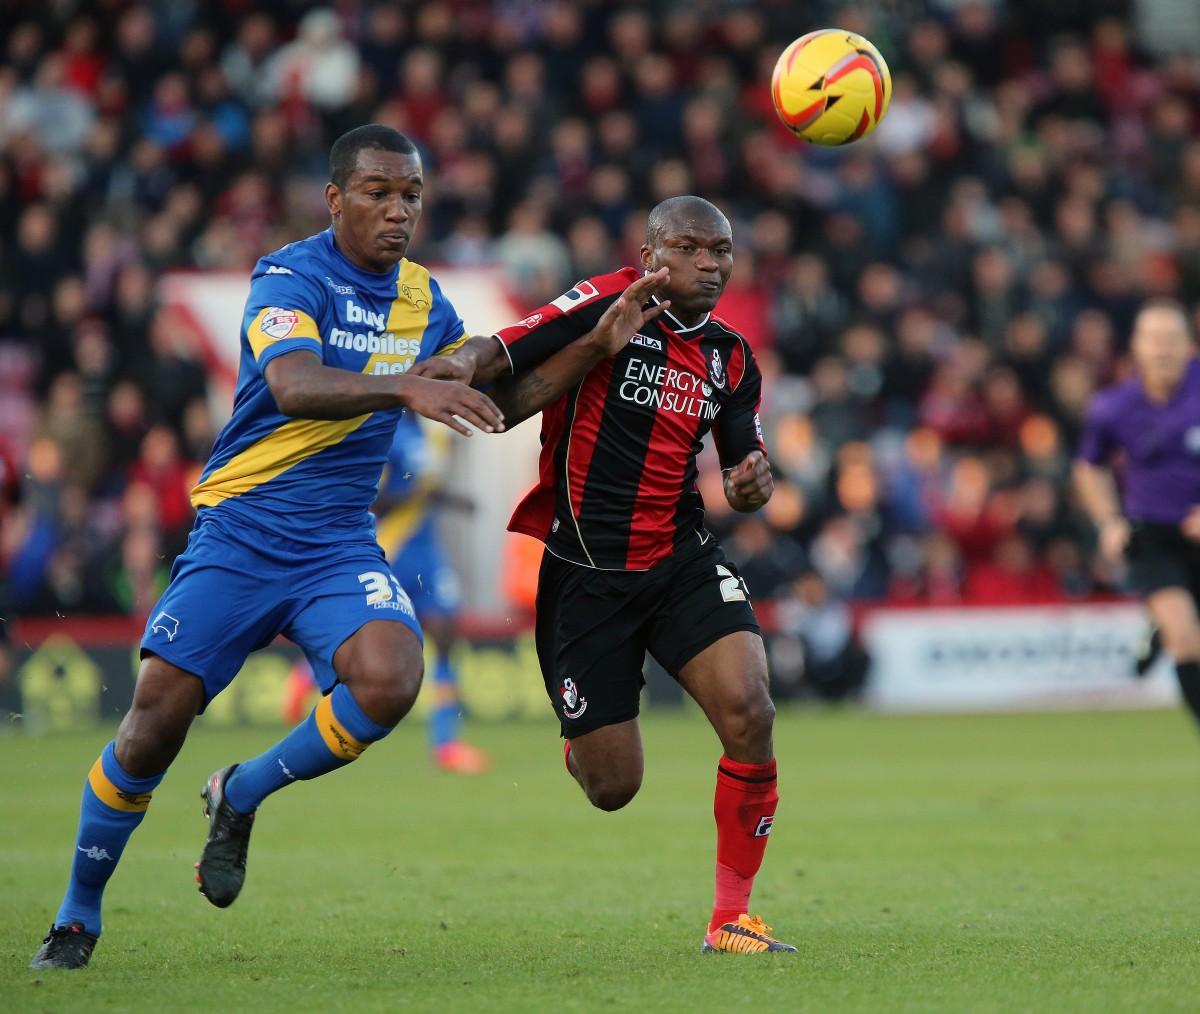 All our pictures from AFC Bournemouth v Derby County at Goldsands Stadium on November 23, 2013